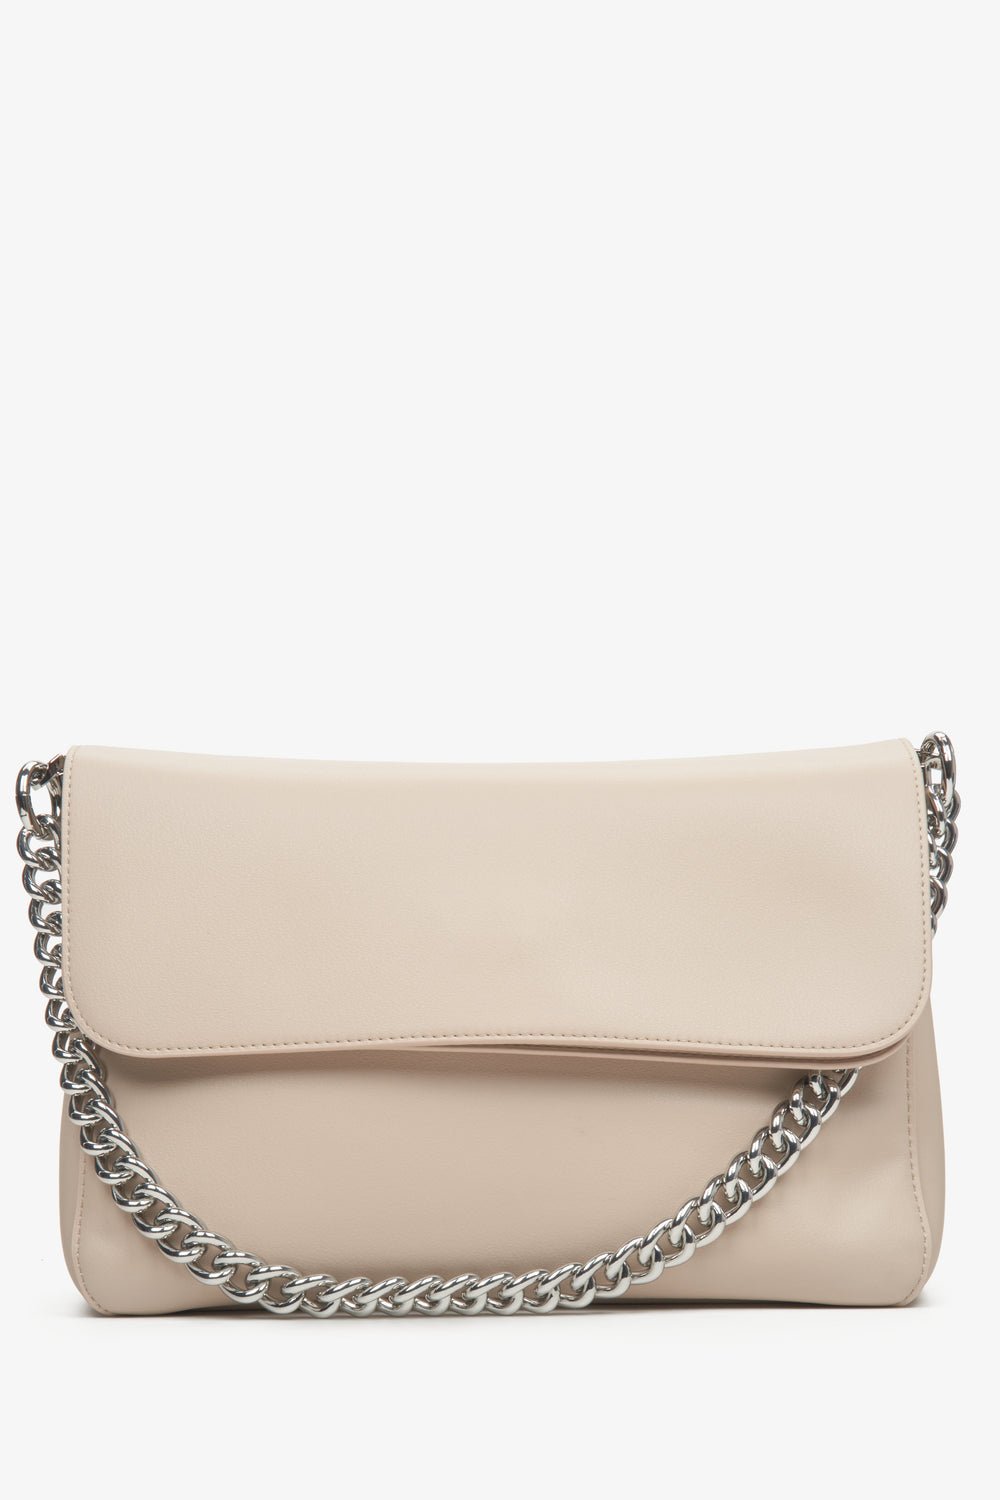 Women's Light Beige Crossbody Bag with Chain made of Genuine Leather Estro ER00113763.